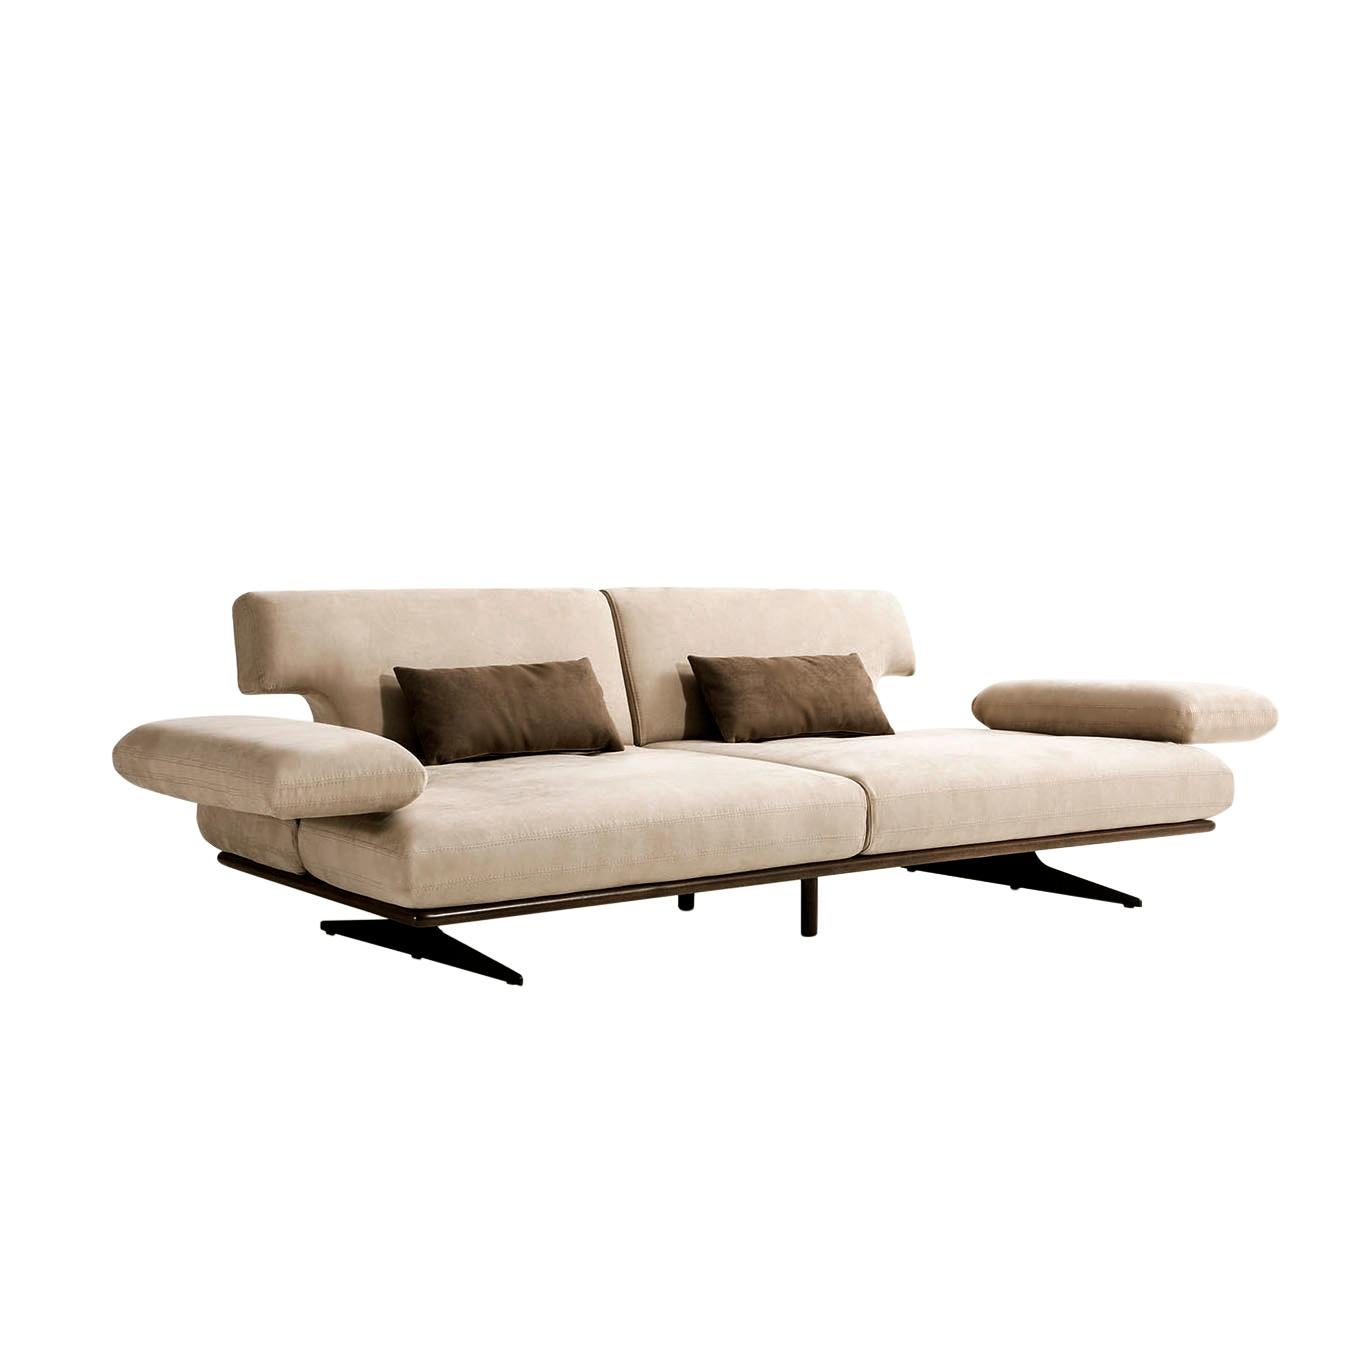 Introducing the modern yet sophisticated Delano sofa. A stunning sofa, the Delano is composed of a lavish beige faux suede fabric with a solid beechwood frame. With a sliding backrest as well as a sliding armrest this sofa can be transformed into a